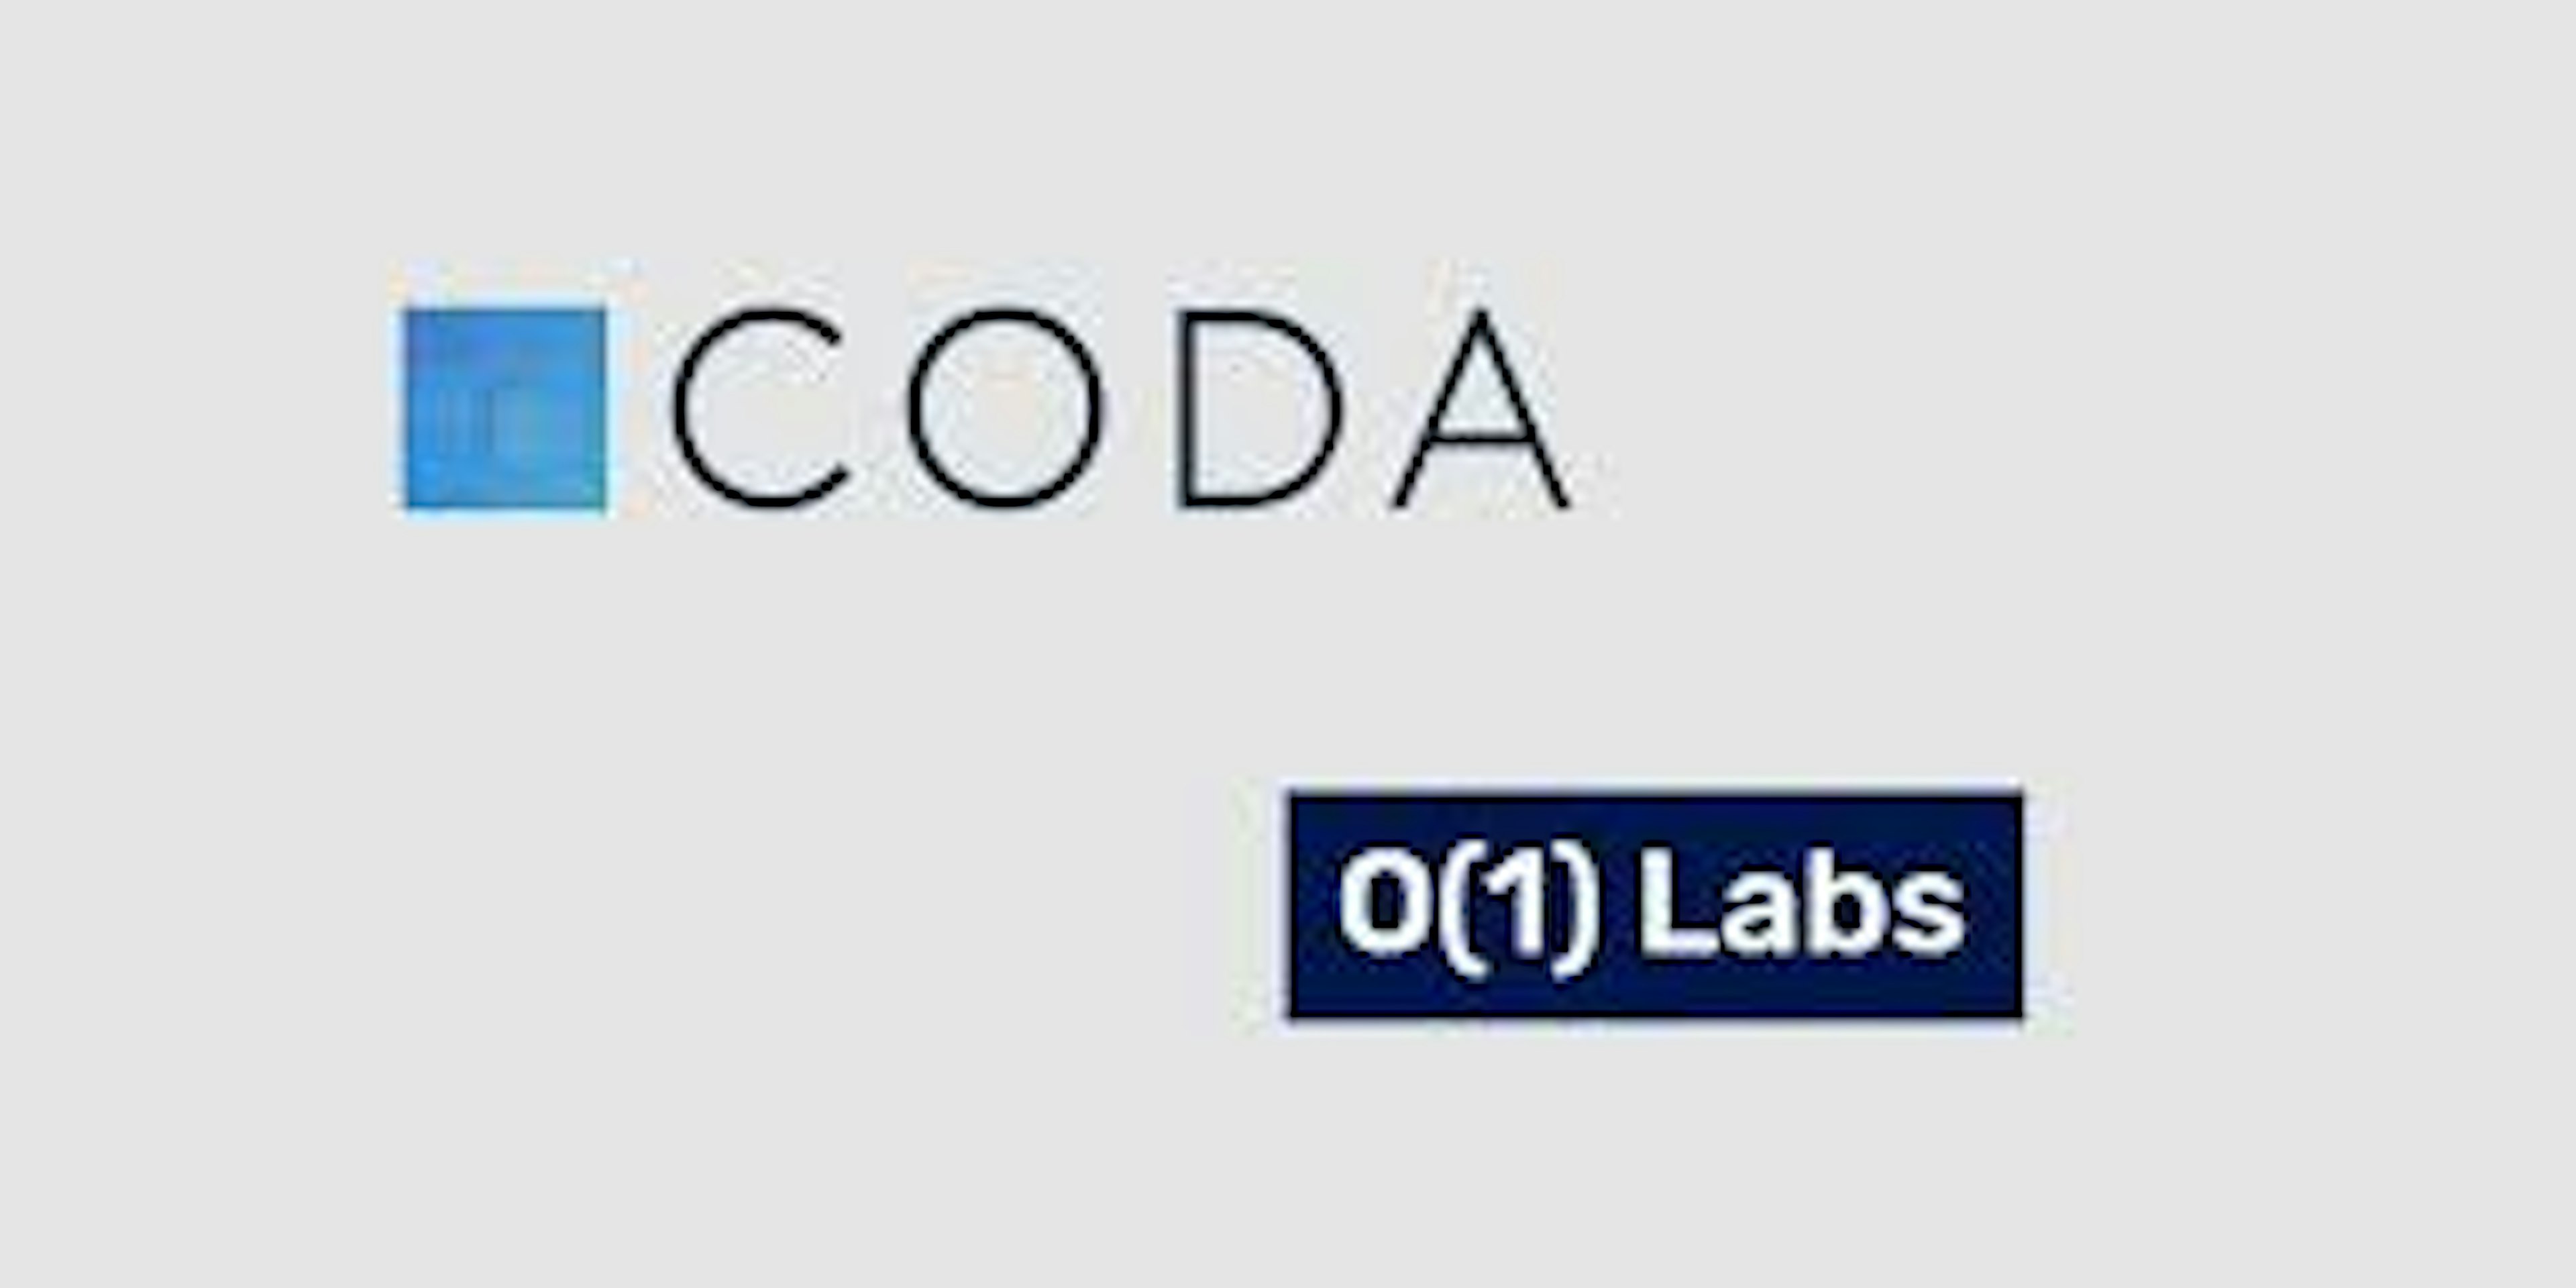 OCaml's connection to λ-calculus and O(1) Labs' Coda protocol!